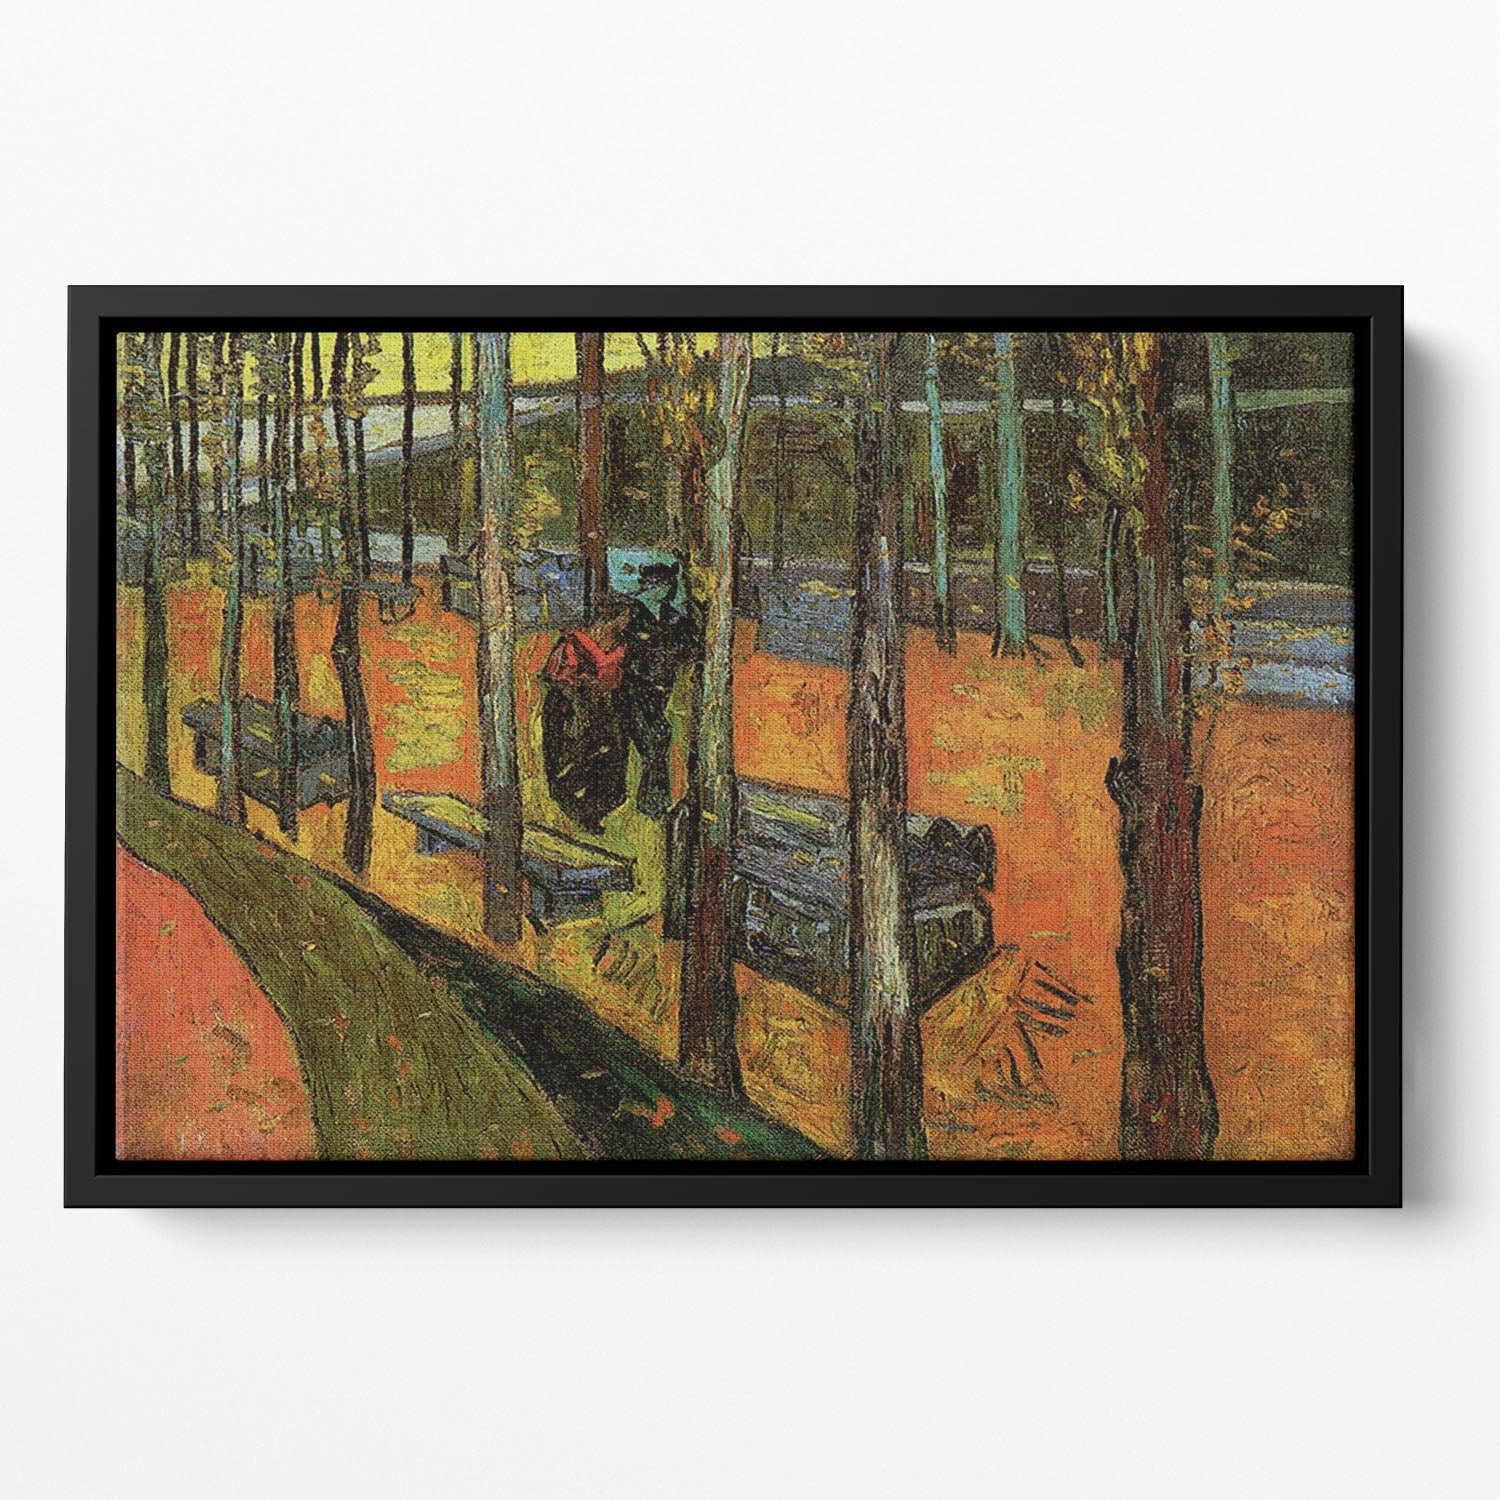 Les Alyscamps 2 by Van Gogh Floating Framed Canvas